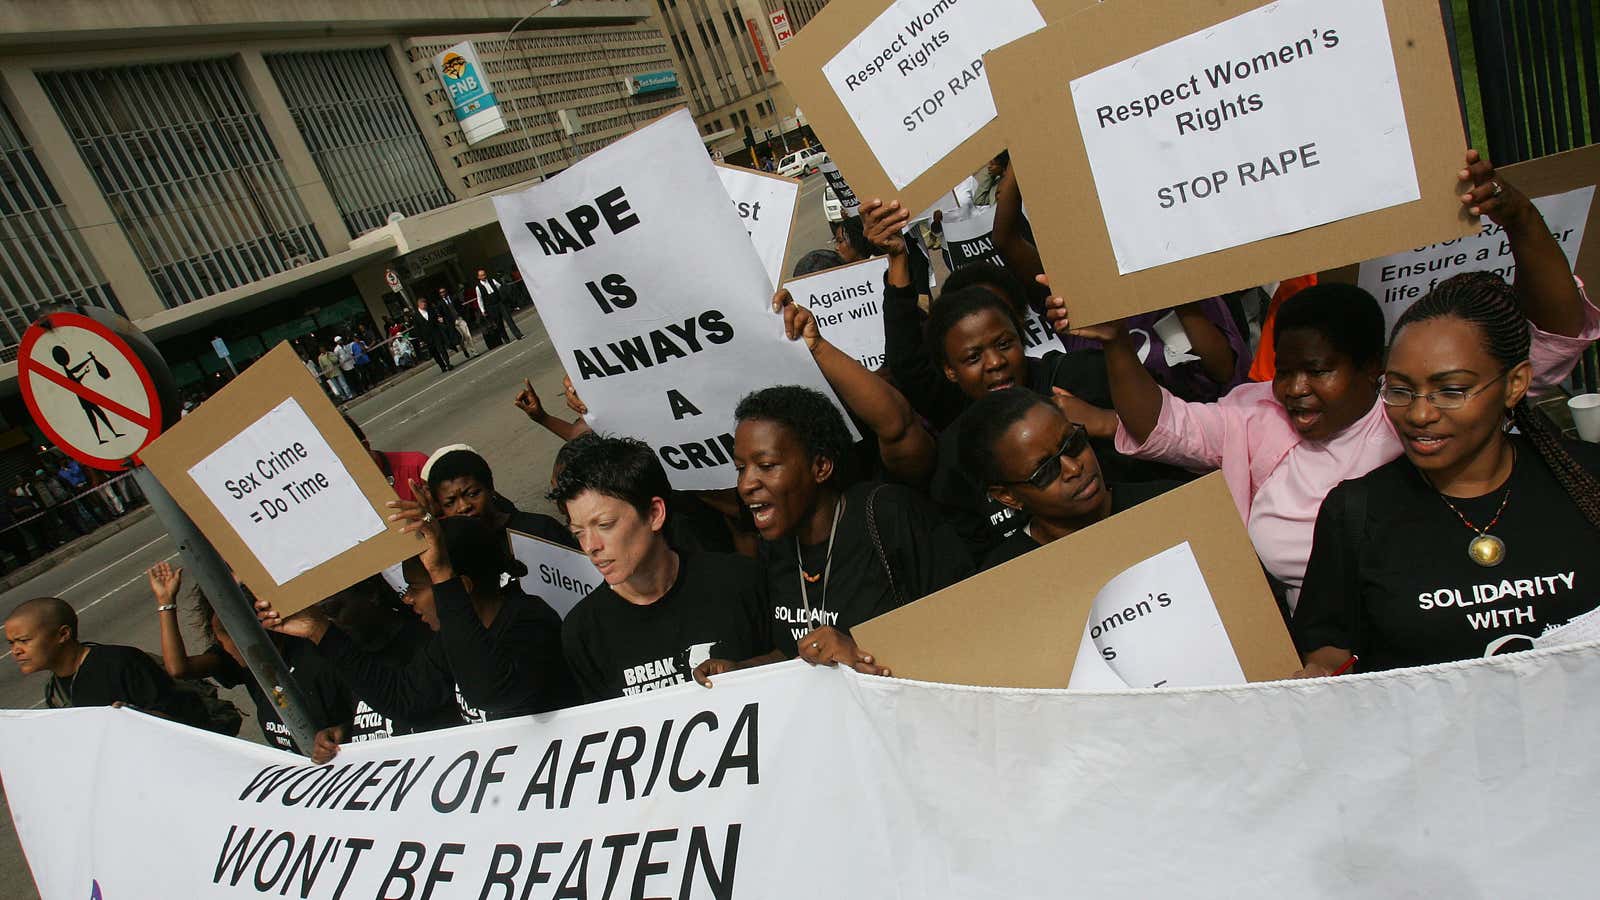 Women’s rights activists against gender violence in South Africa